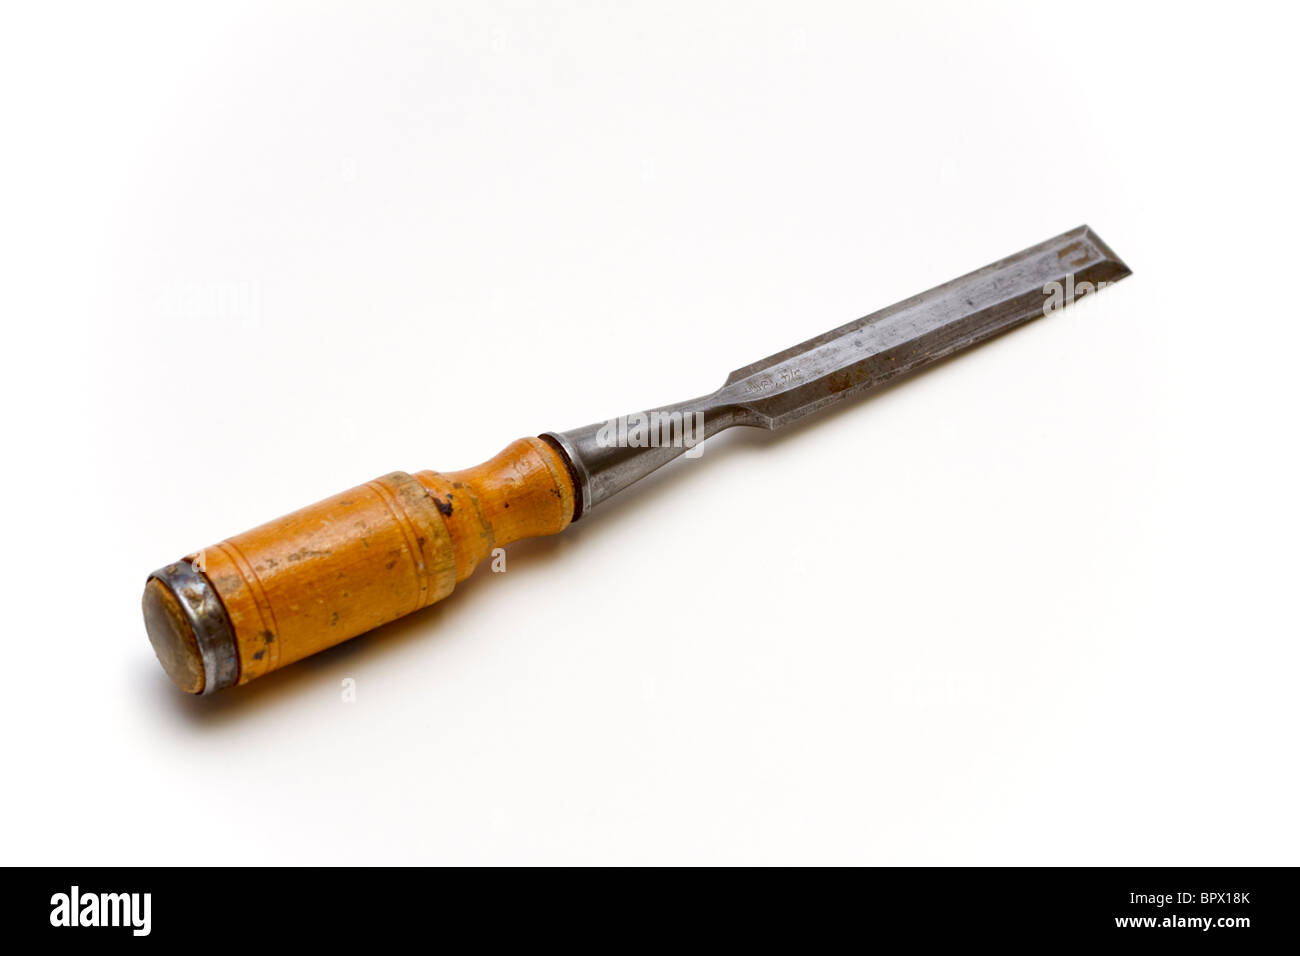 Chisel with a wooden handle on a white background Stock Photo